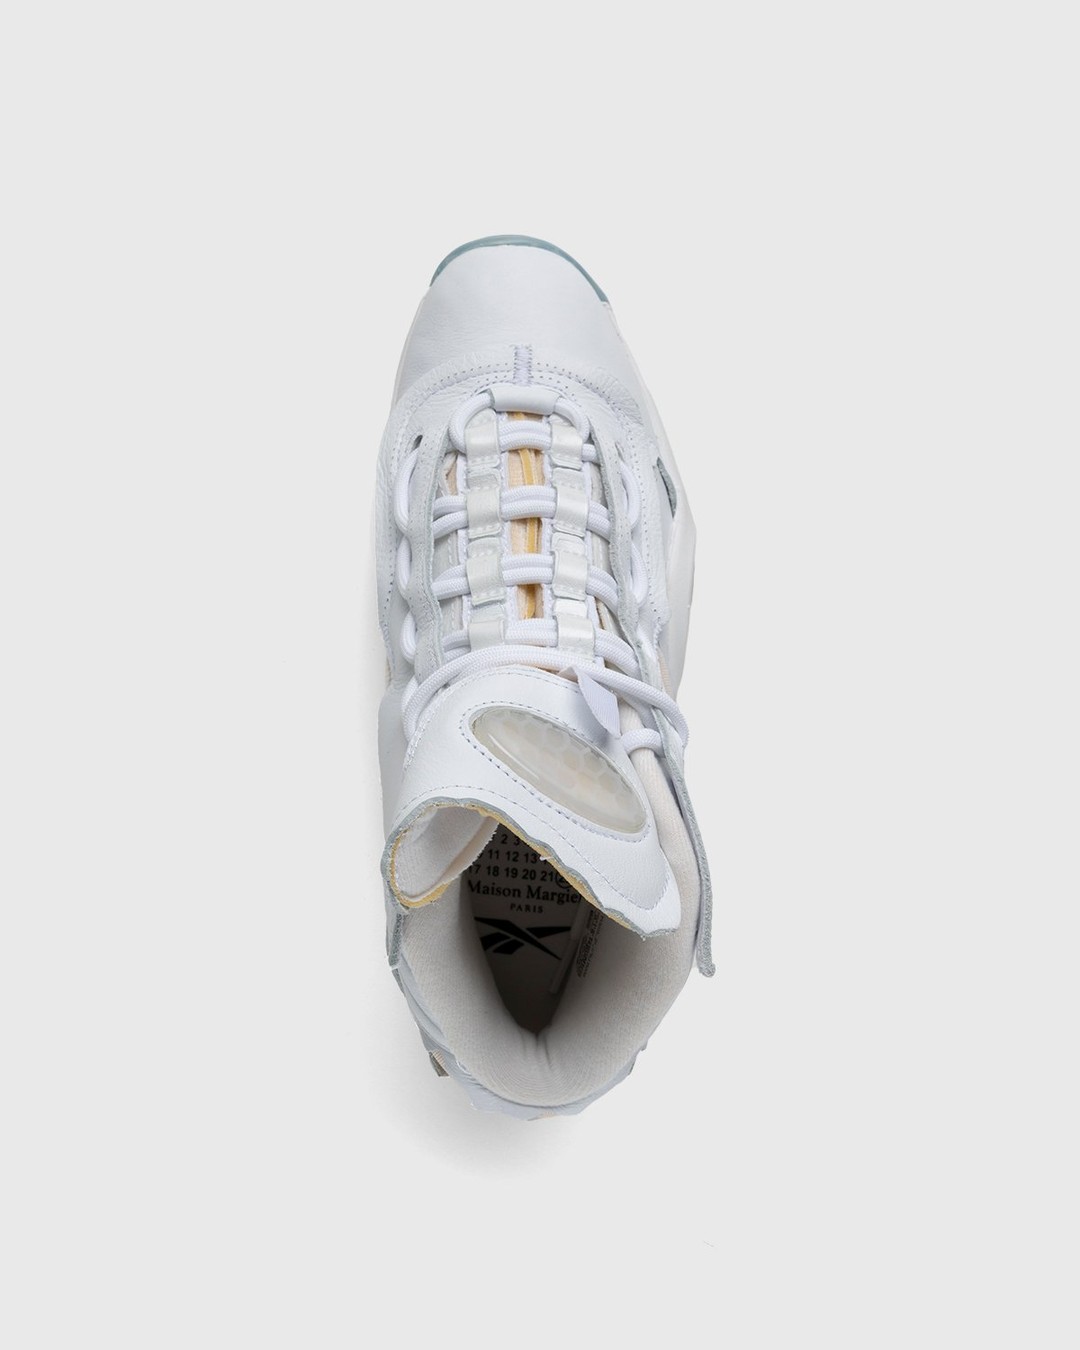 Reebok x Maison Margiela – Question Mid Memory Of White - High Top Sneakers - White - Image 5